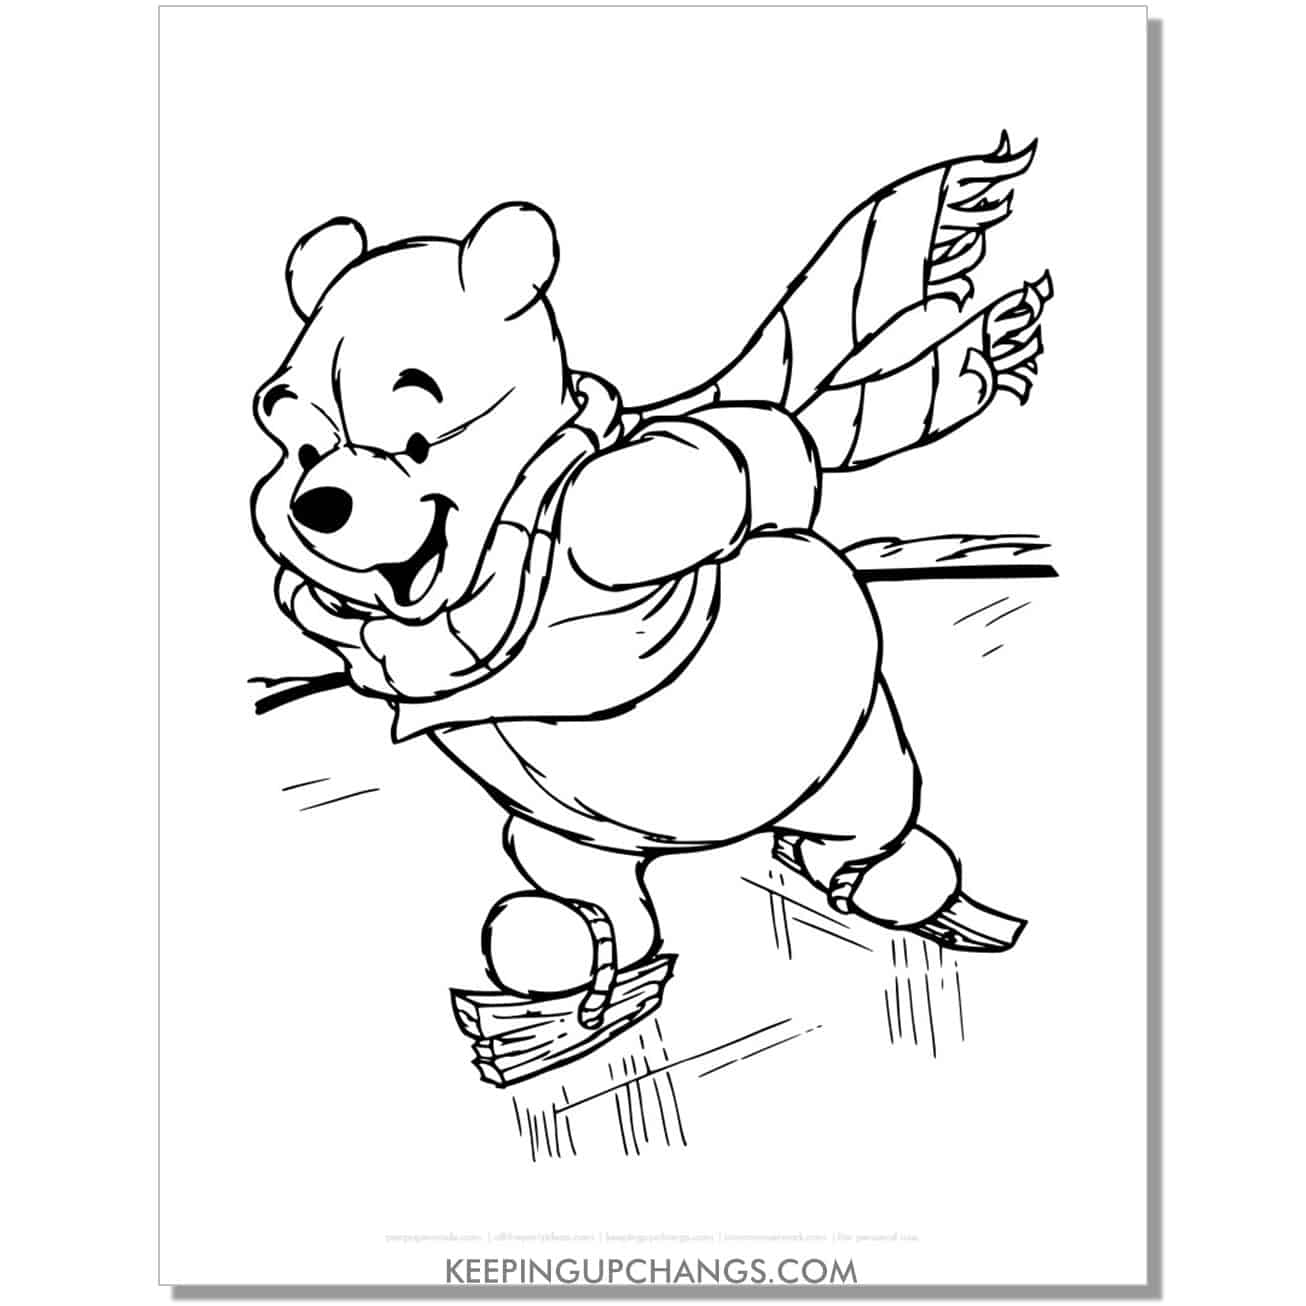 https://keepingupchangs.com/wp-content/uploads/free-winnie-pooh-ice-skating-winter-christmas-coloring-page-colouring-sheet.jpg